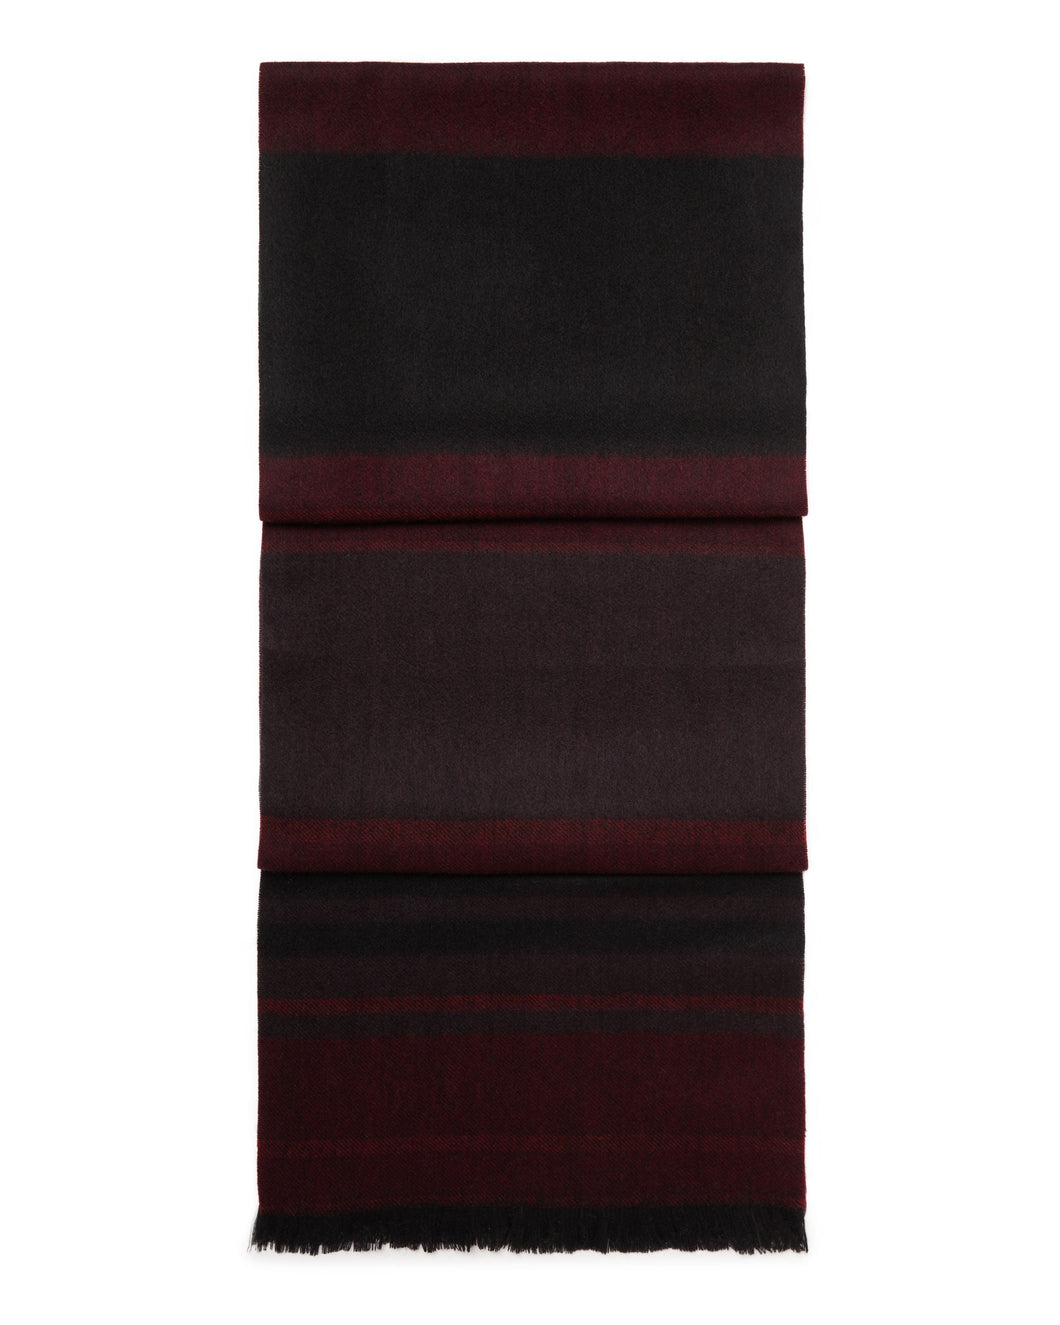 N.Peal Unisex Woven Check Cashmere Scarf Burgundy Red